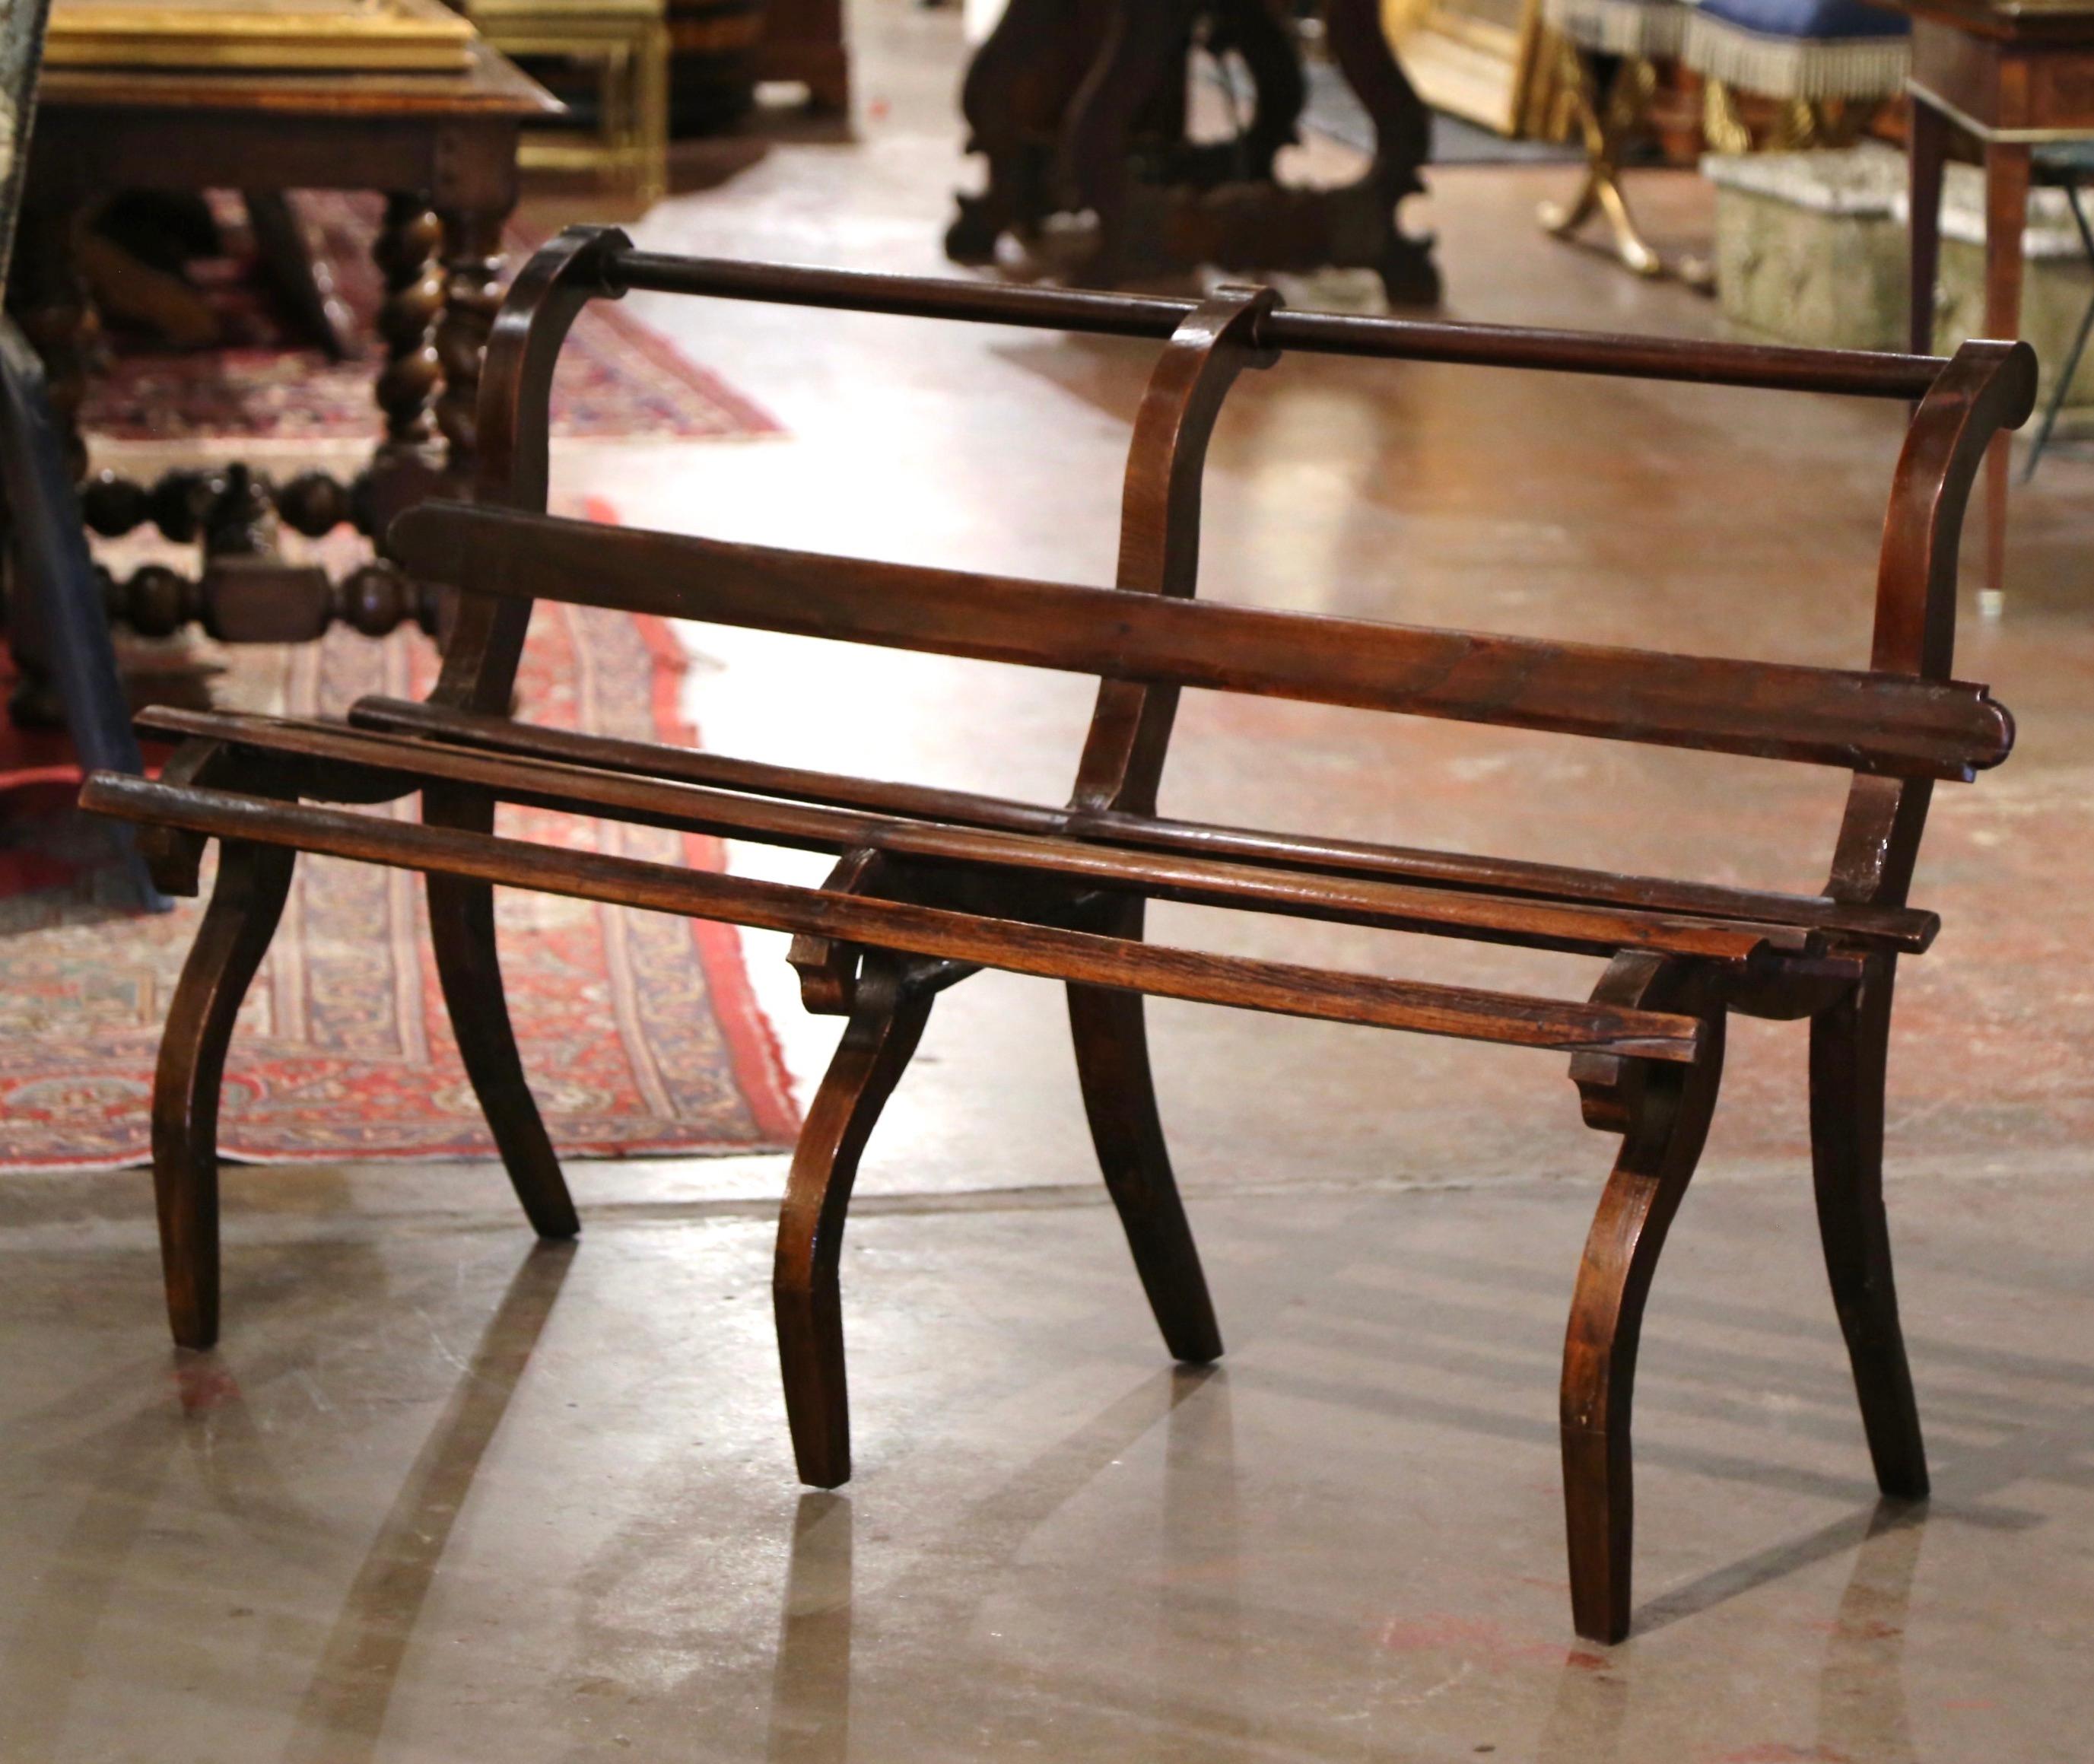 Crafted in France circa 1880 and made of oak, the antique bench stands on six curved legs and features four slat panels on the seat and a single slat across the open back embellished with turned top rail. The rustic bench is in excellent condition